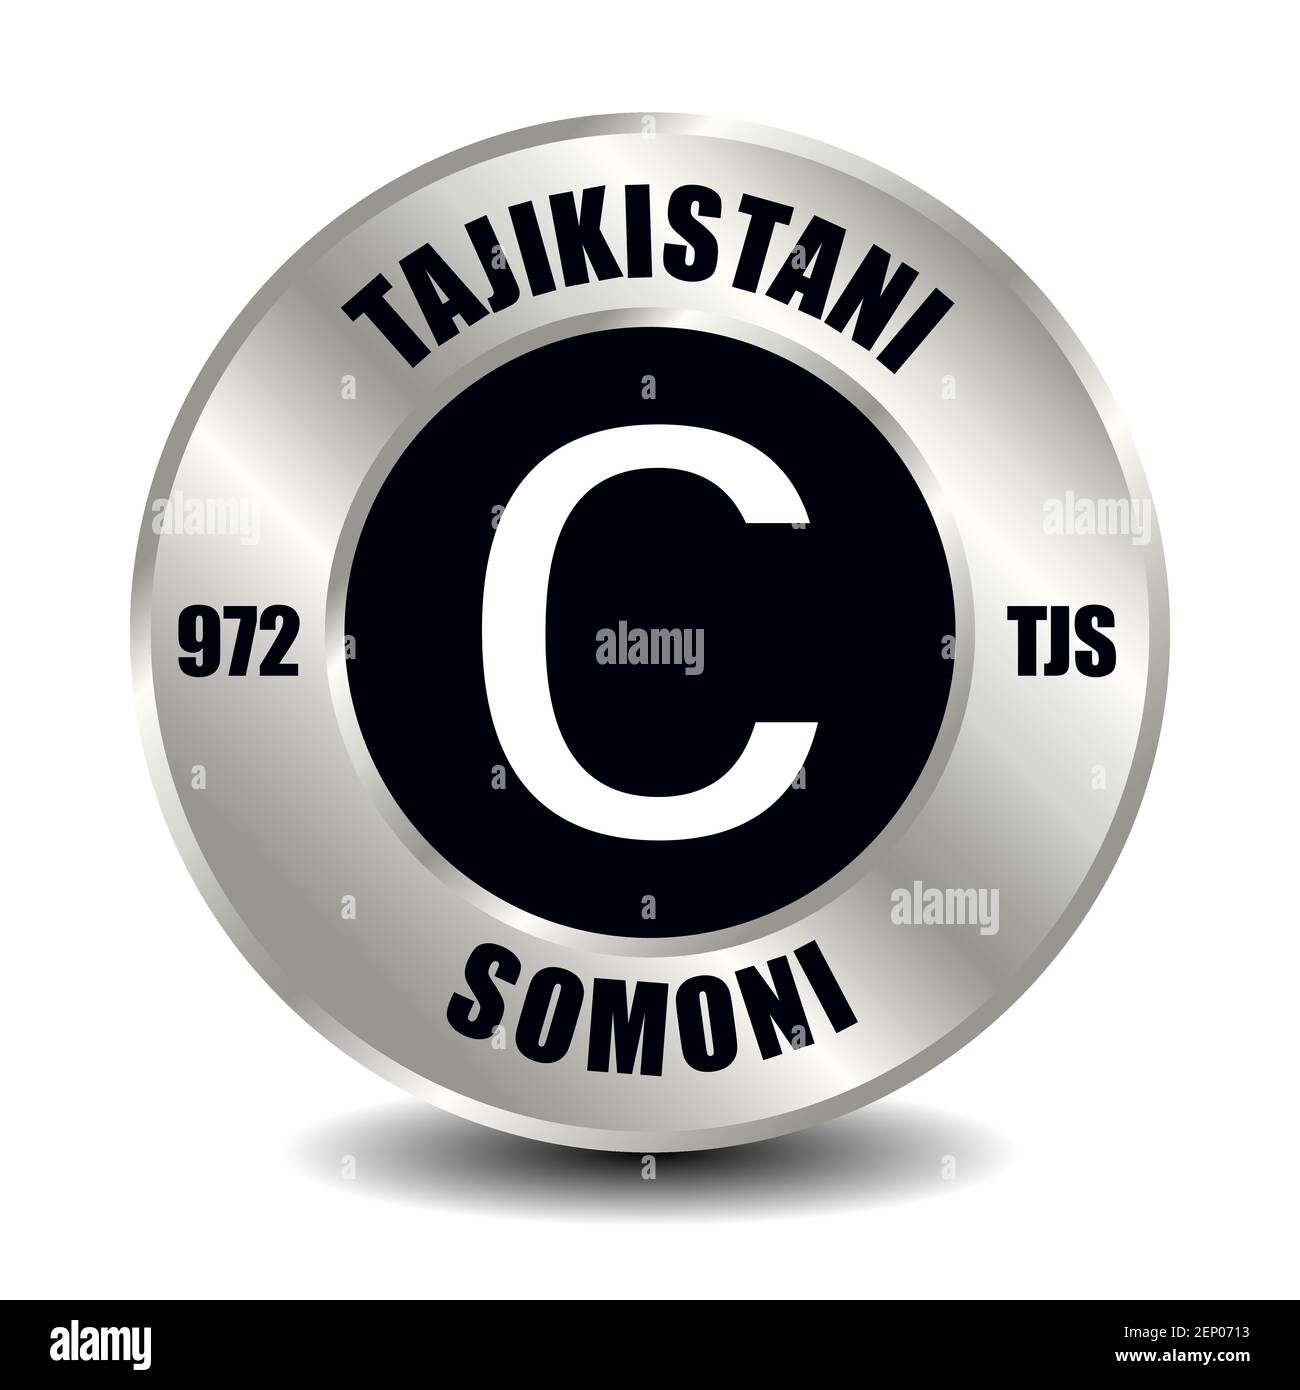 Tajikistan money icon isolated on round silver coin. Vector sign of currency symbol with international ISO code and abbreviation Stock Vector